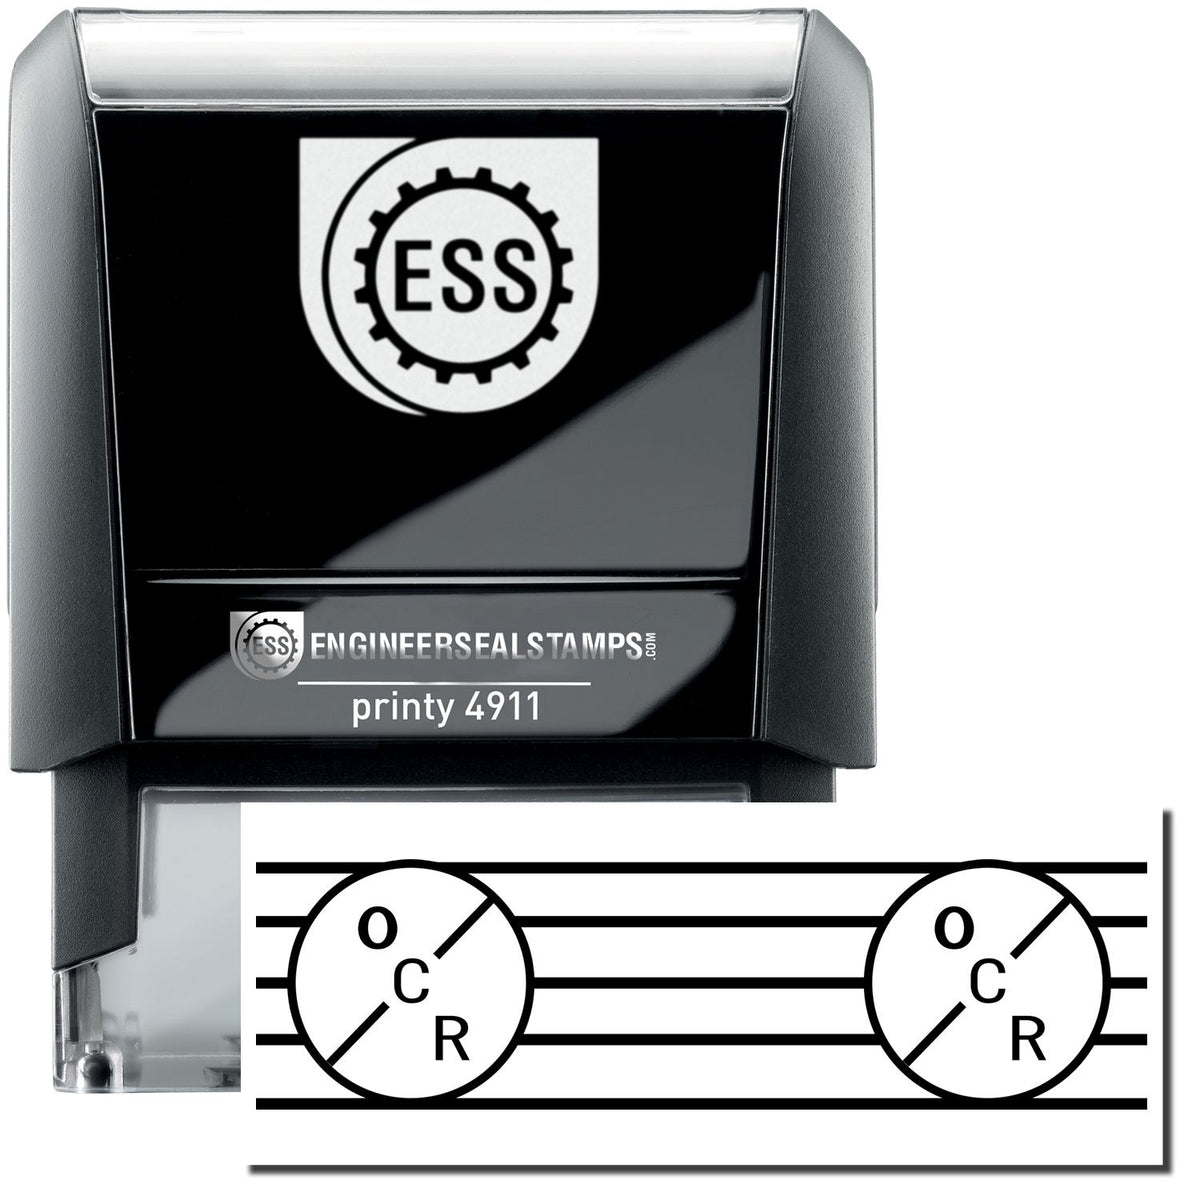 A self-inking stamp with a stamped image showing how the text &quot;OCR&quot; with extra design elements like lines and circles is displayed after stamping.